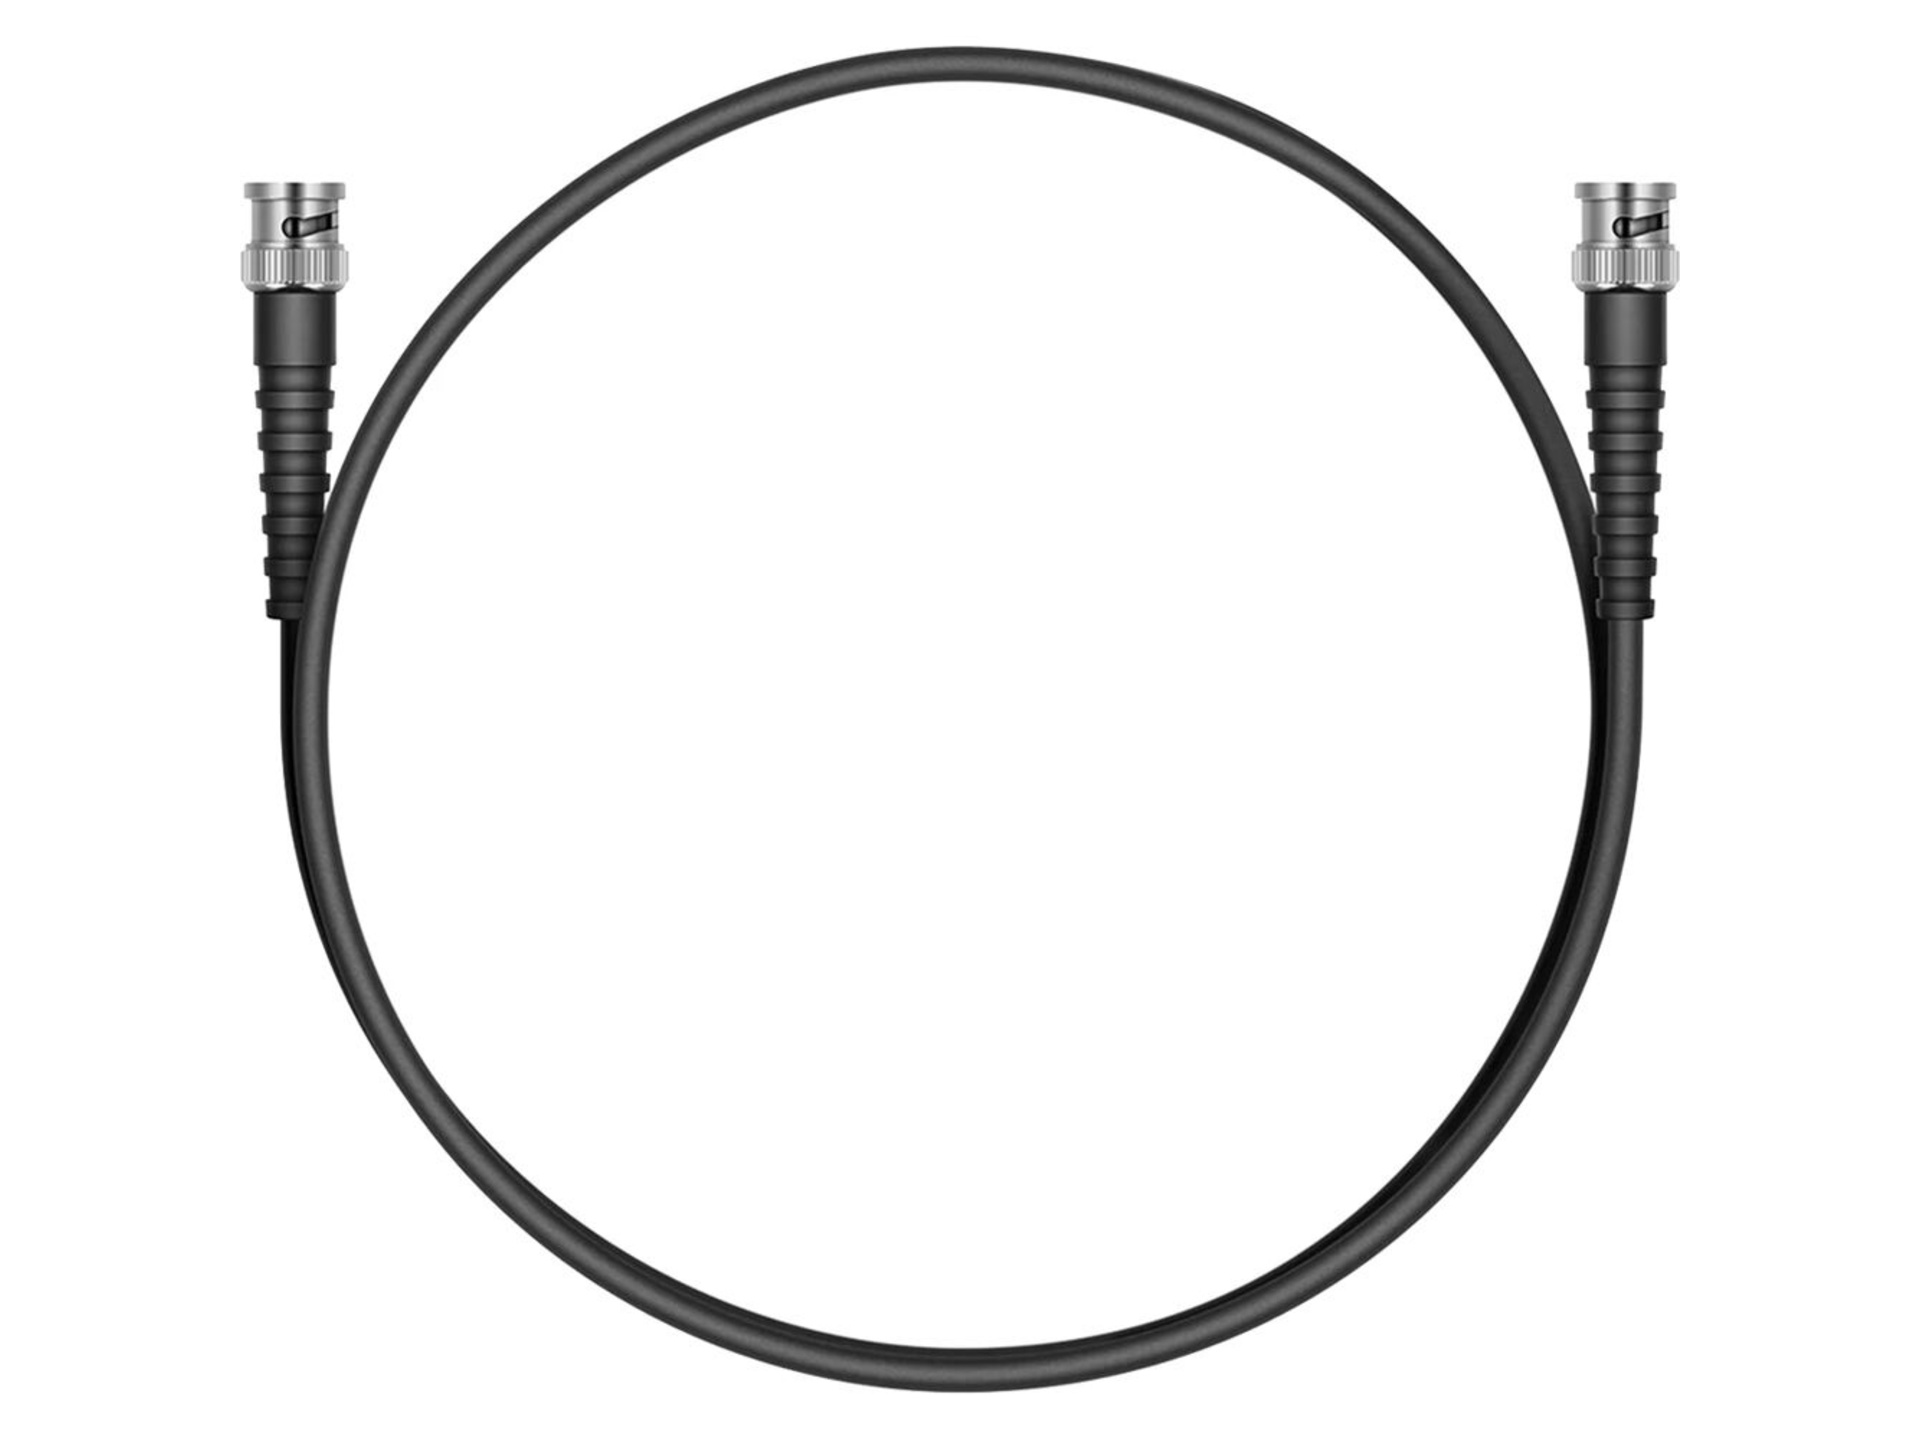 Sennheiser GZL RG 58 Coaxial RF Antenna Cable with BNC Connectors (1m)